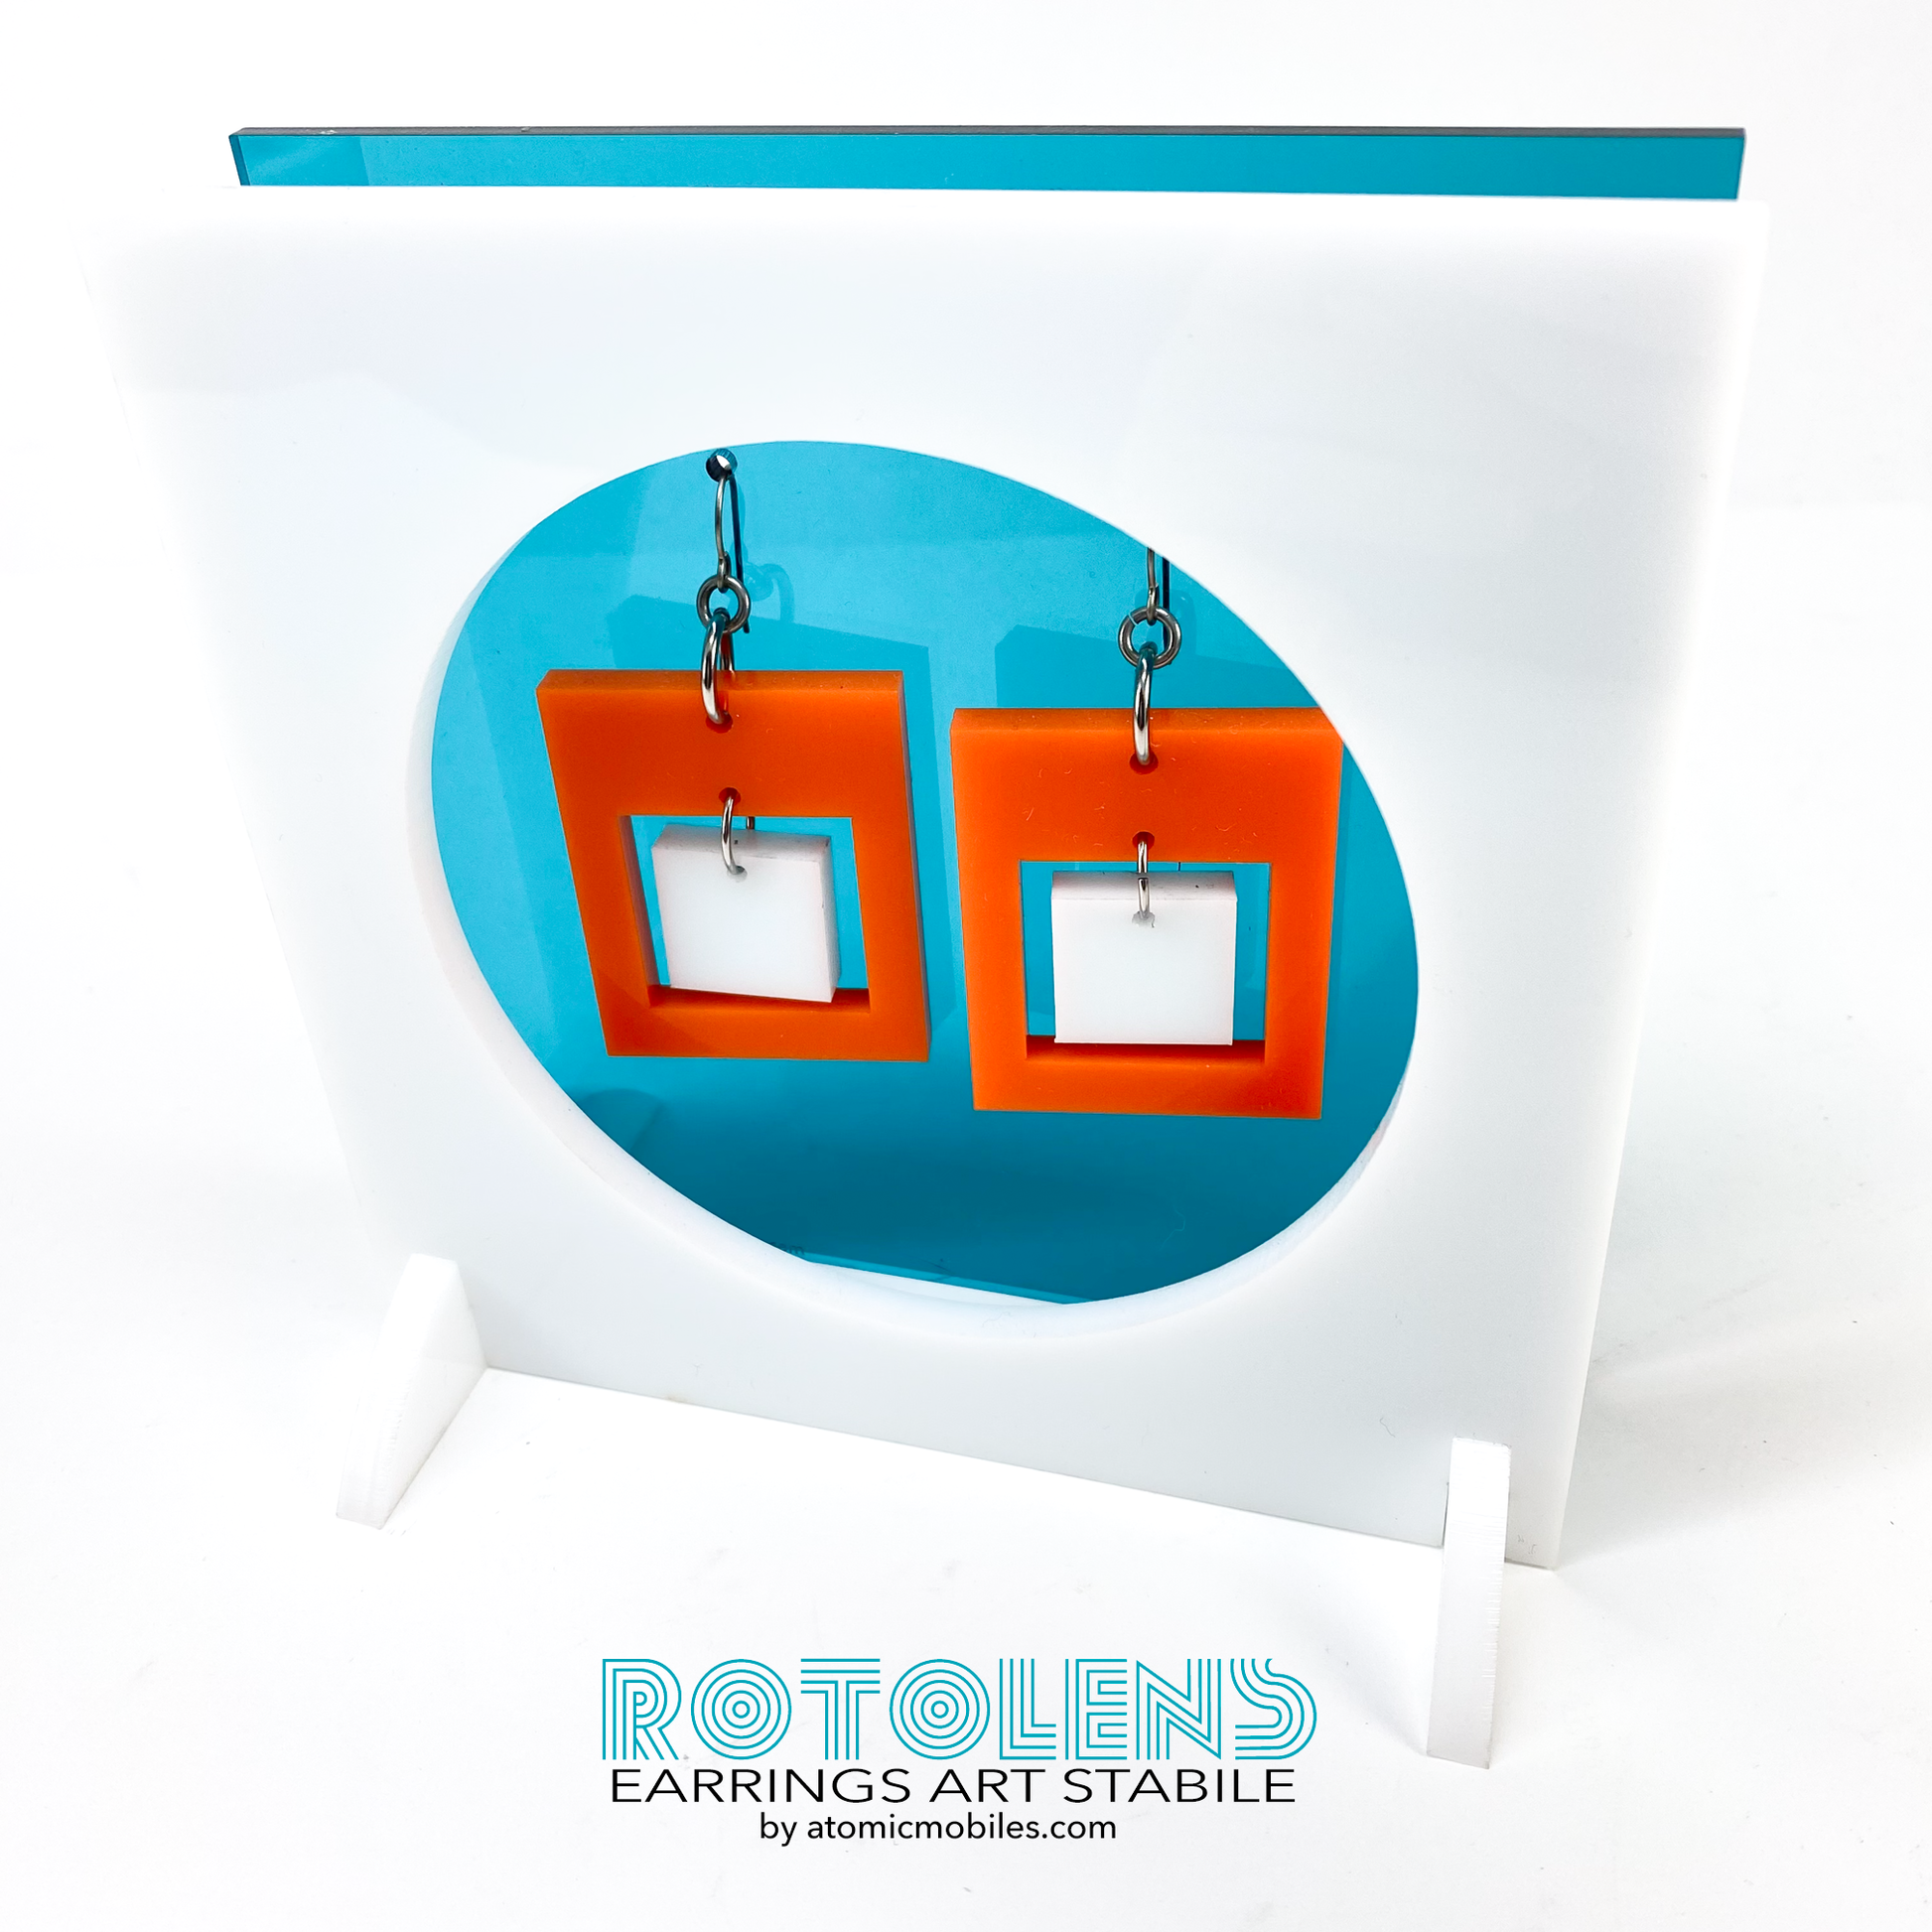 Stunning Art Earrings Stabile Set featuring transparent teal backing with orange and white earrings - mid century modern art for Groovy People by AtomicMobiles.com